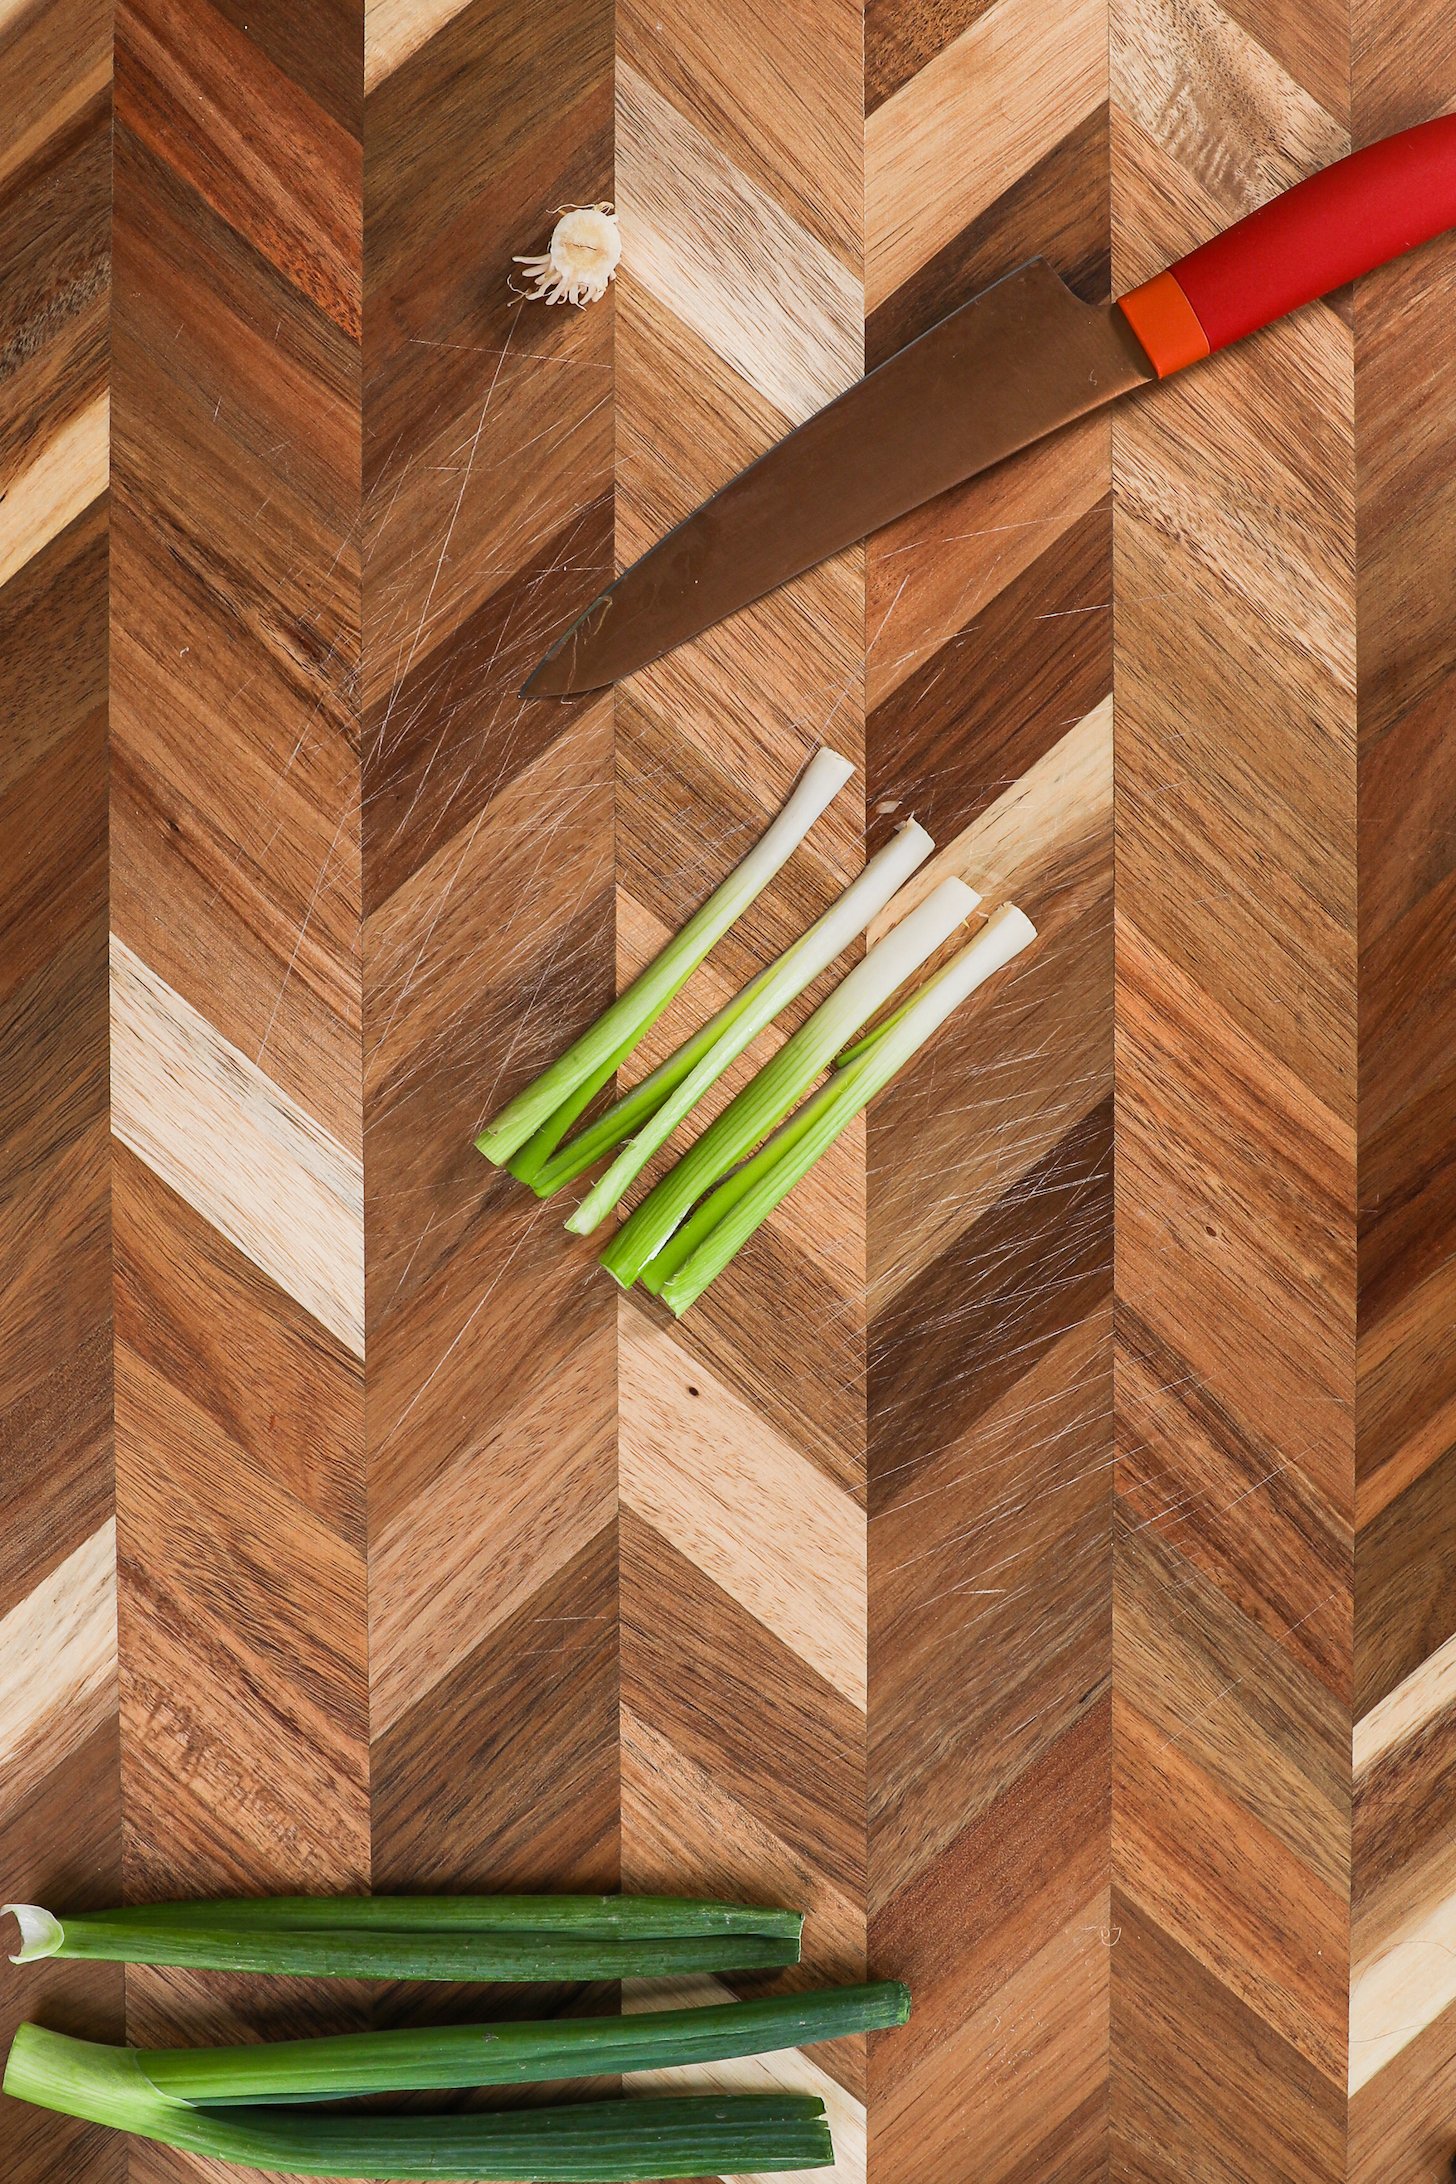 Four strips of spring onion with a red knife on a checkered wooden board.